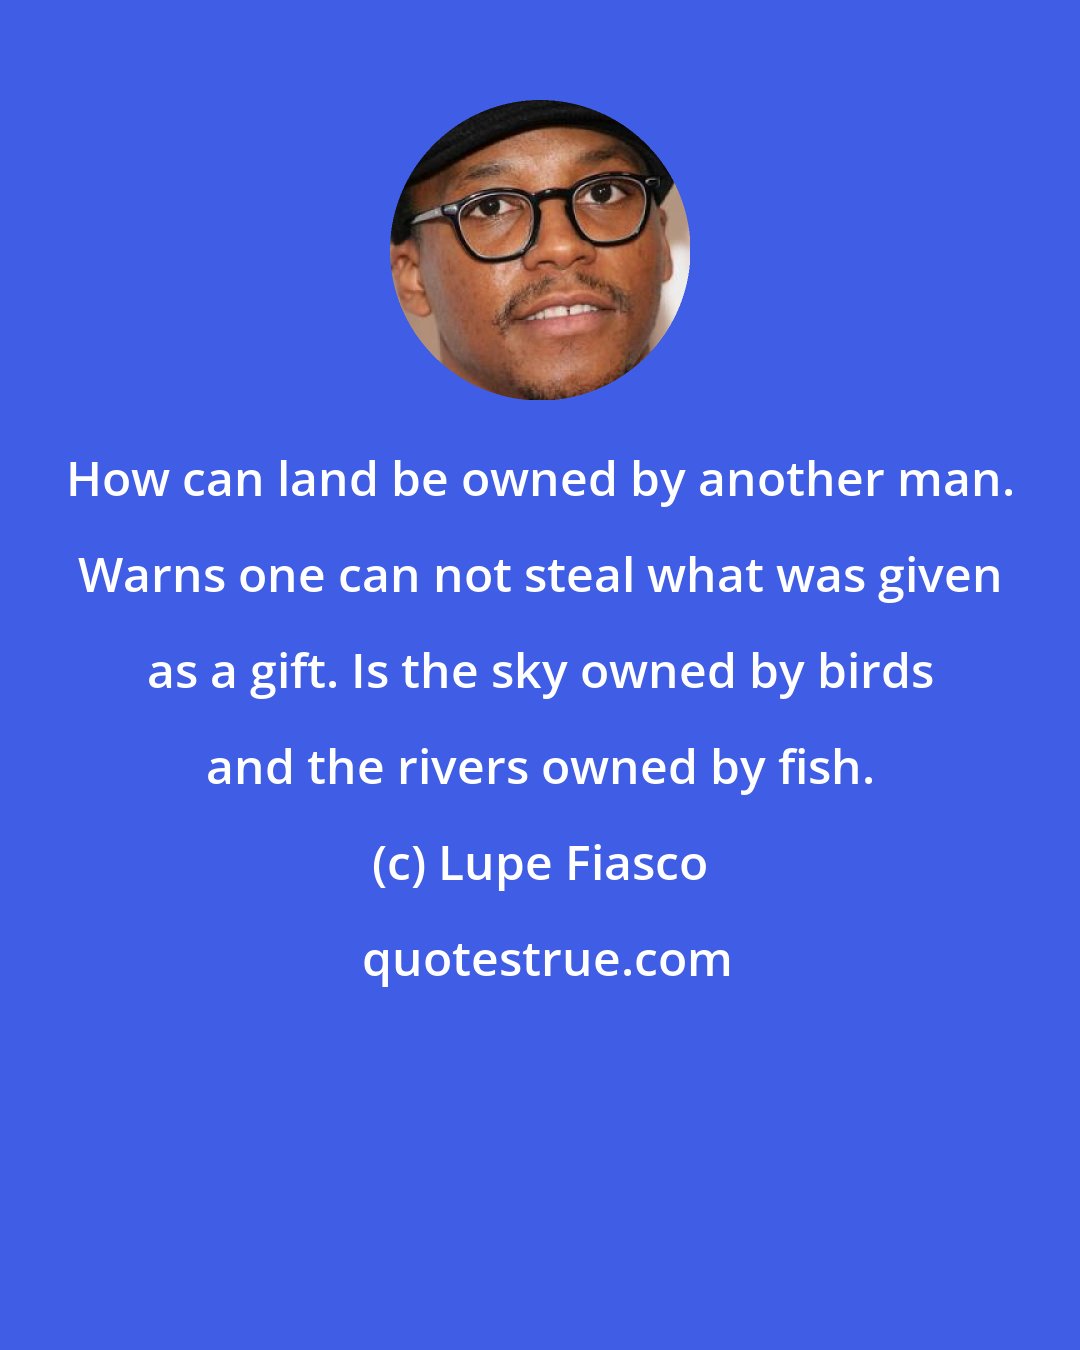 Lupe Fiasco: How can land be owned by another man. Warns one can not steal what was given as a gift. Is the sky owned by birds and the rivers owned by fish.